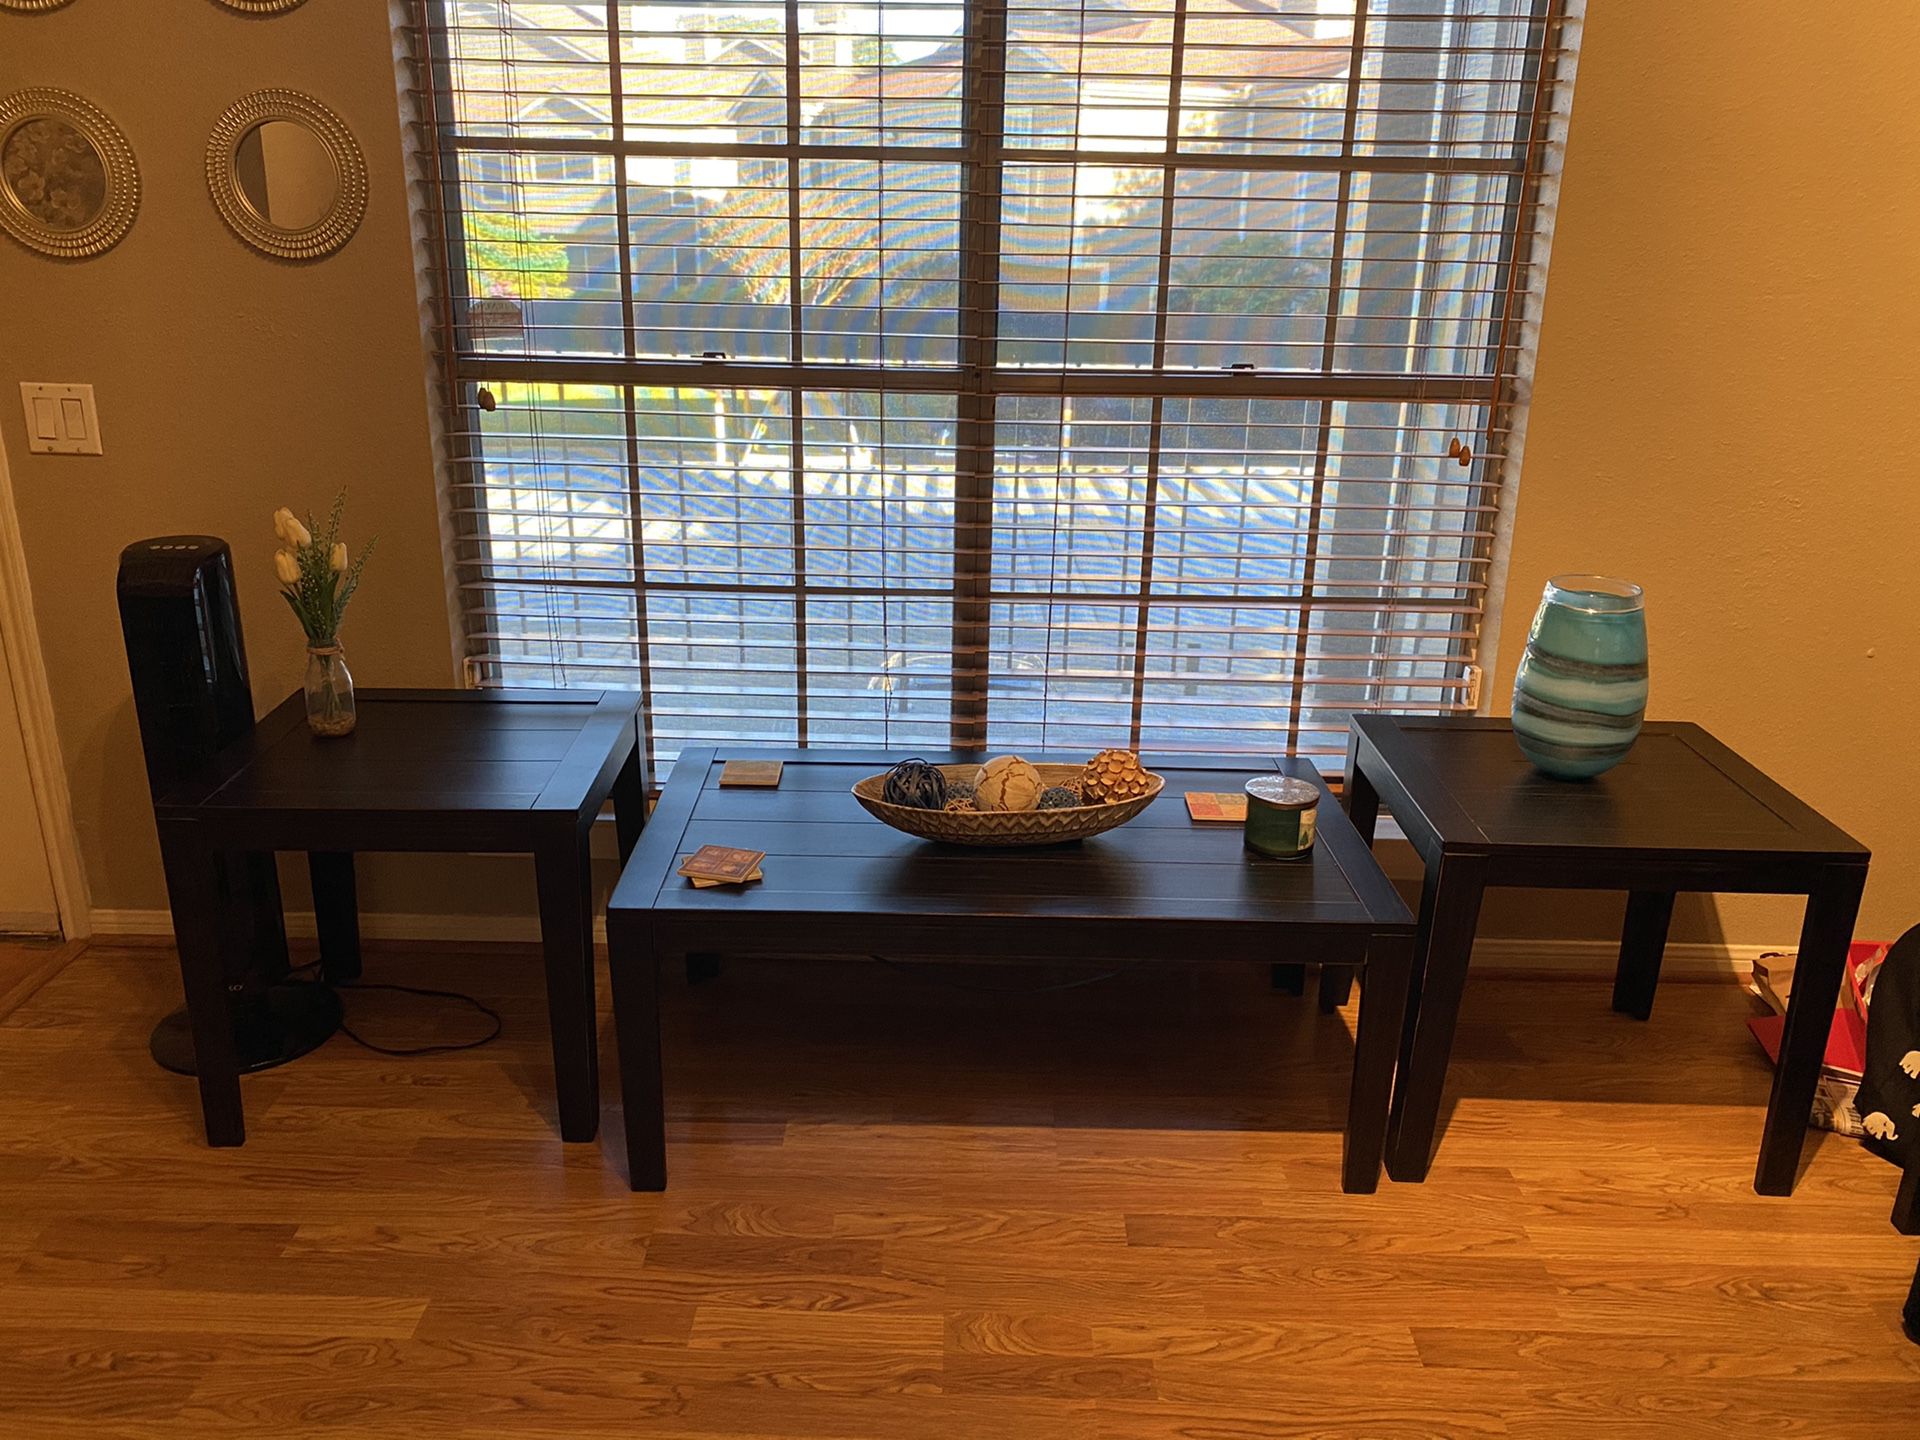 Coffee table and 2 end tables